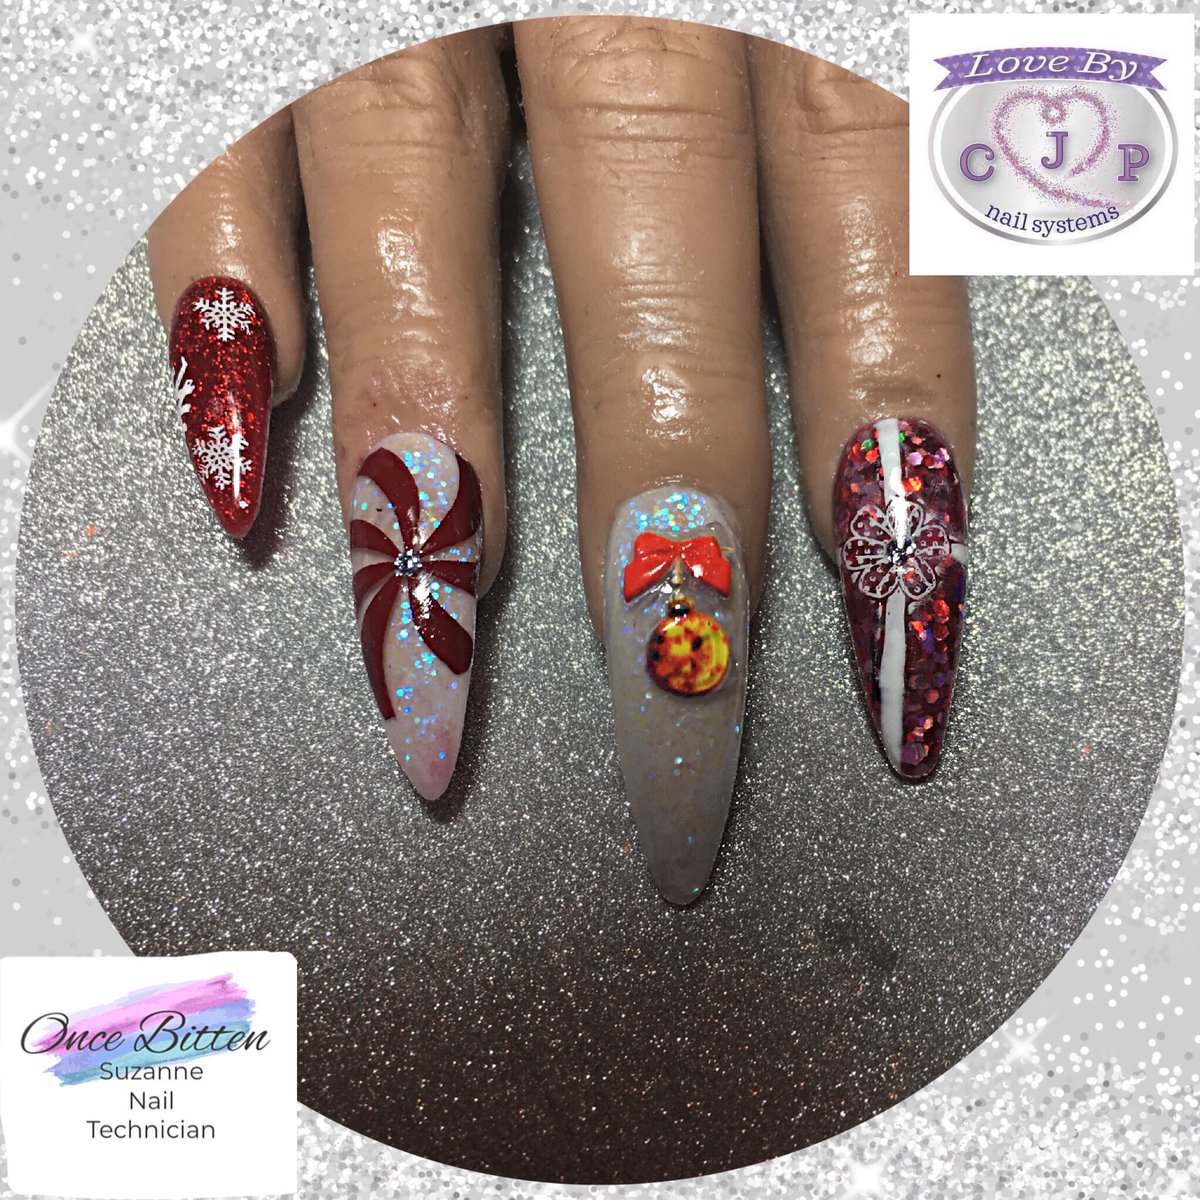 My entry for Xmas nail competition. Wish me luck!!
 #Glitter
#CJPAcrylicSystems #NailArt
#Pampertime #Homebased 
#StockportNailTech #SK5Reddish
#NailsOfInstagram #ShowScratch
#ScratchMagazine #NailPro #SWNailShares #Nails
#NailPromote #InstaNails 
#NailedIt #NailsOfTheDay